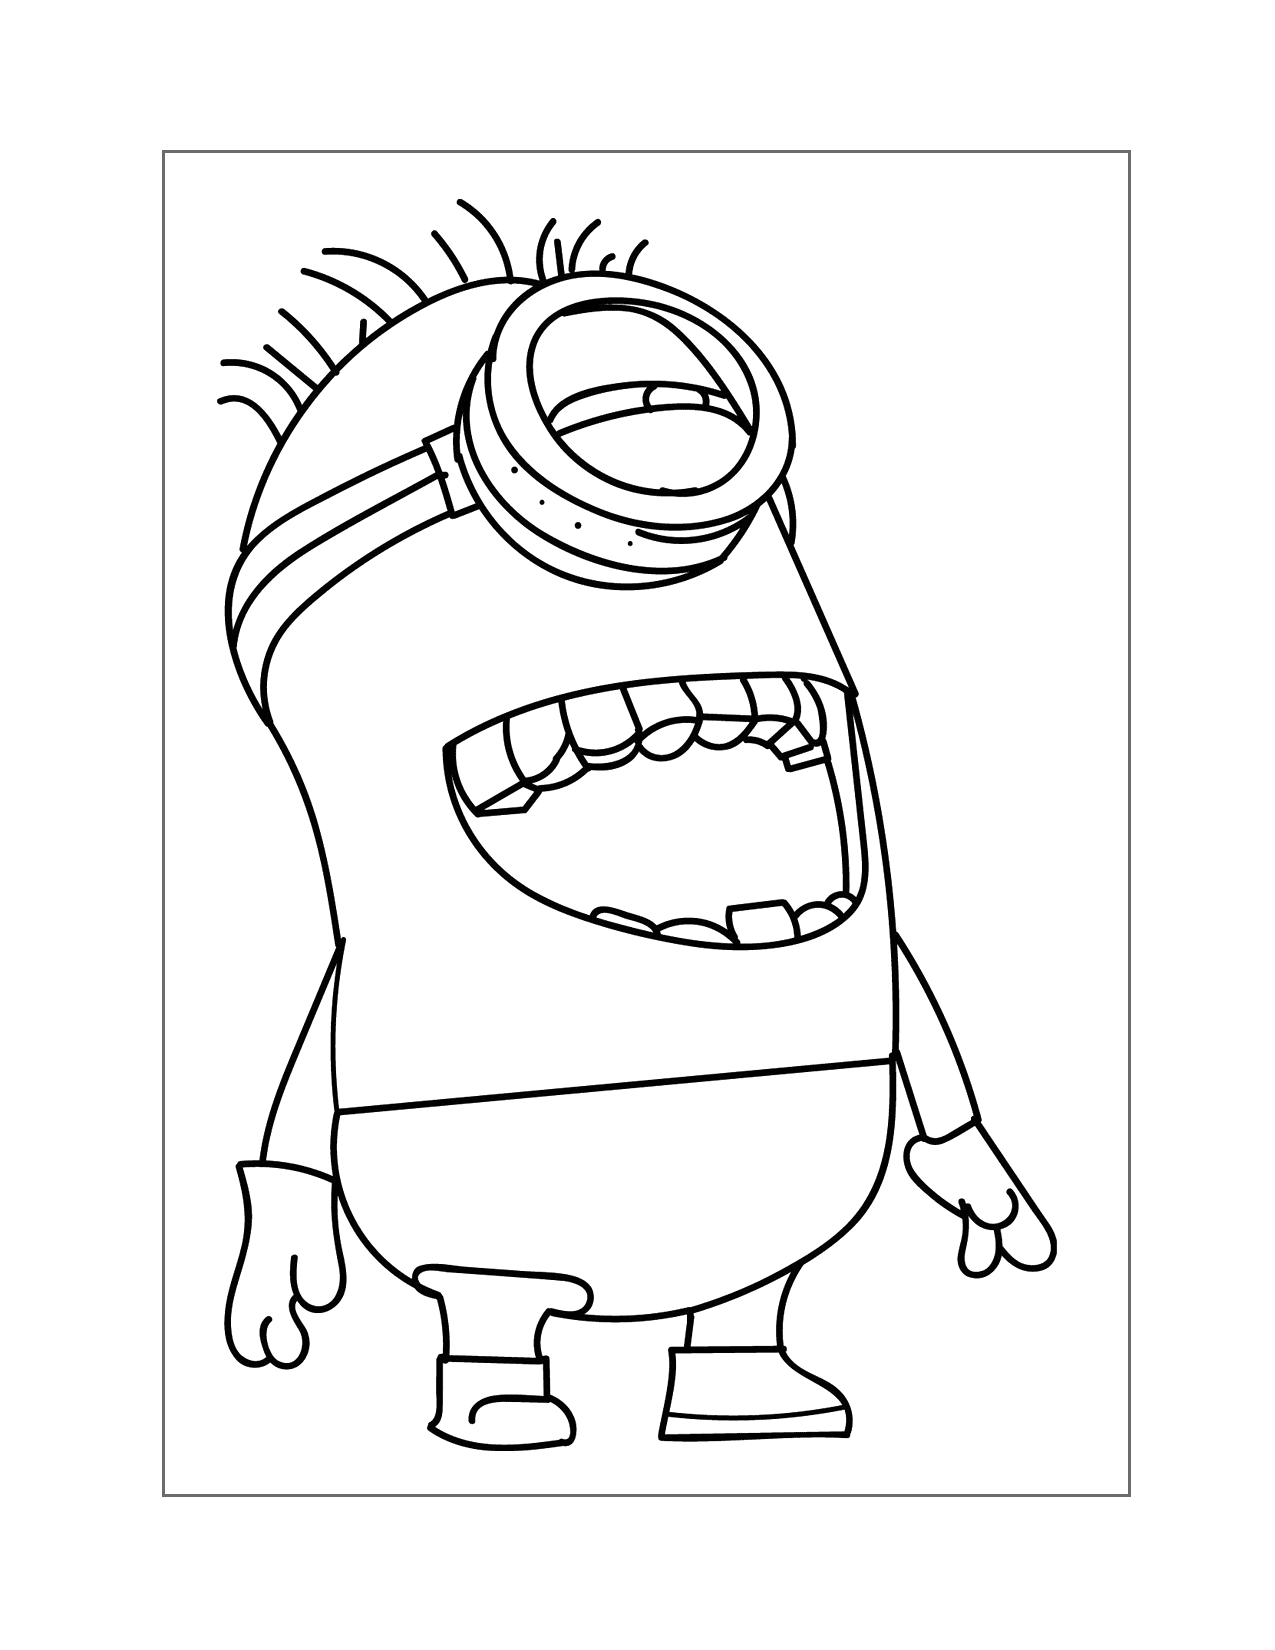 Funny Minion Coloring Page